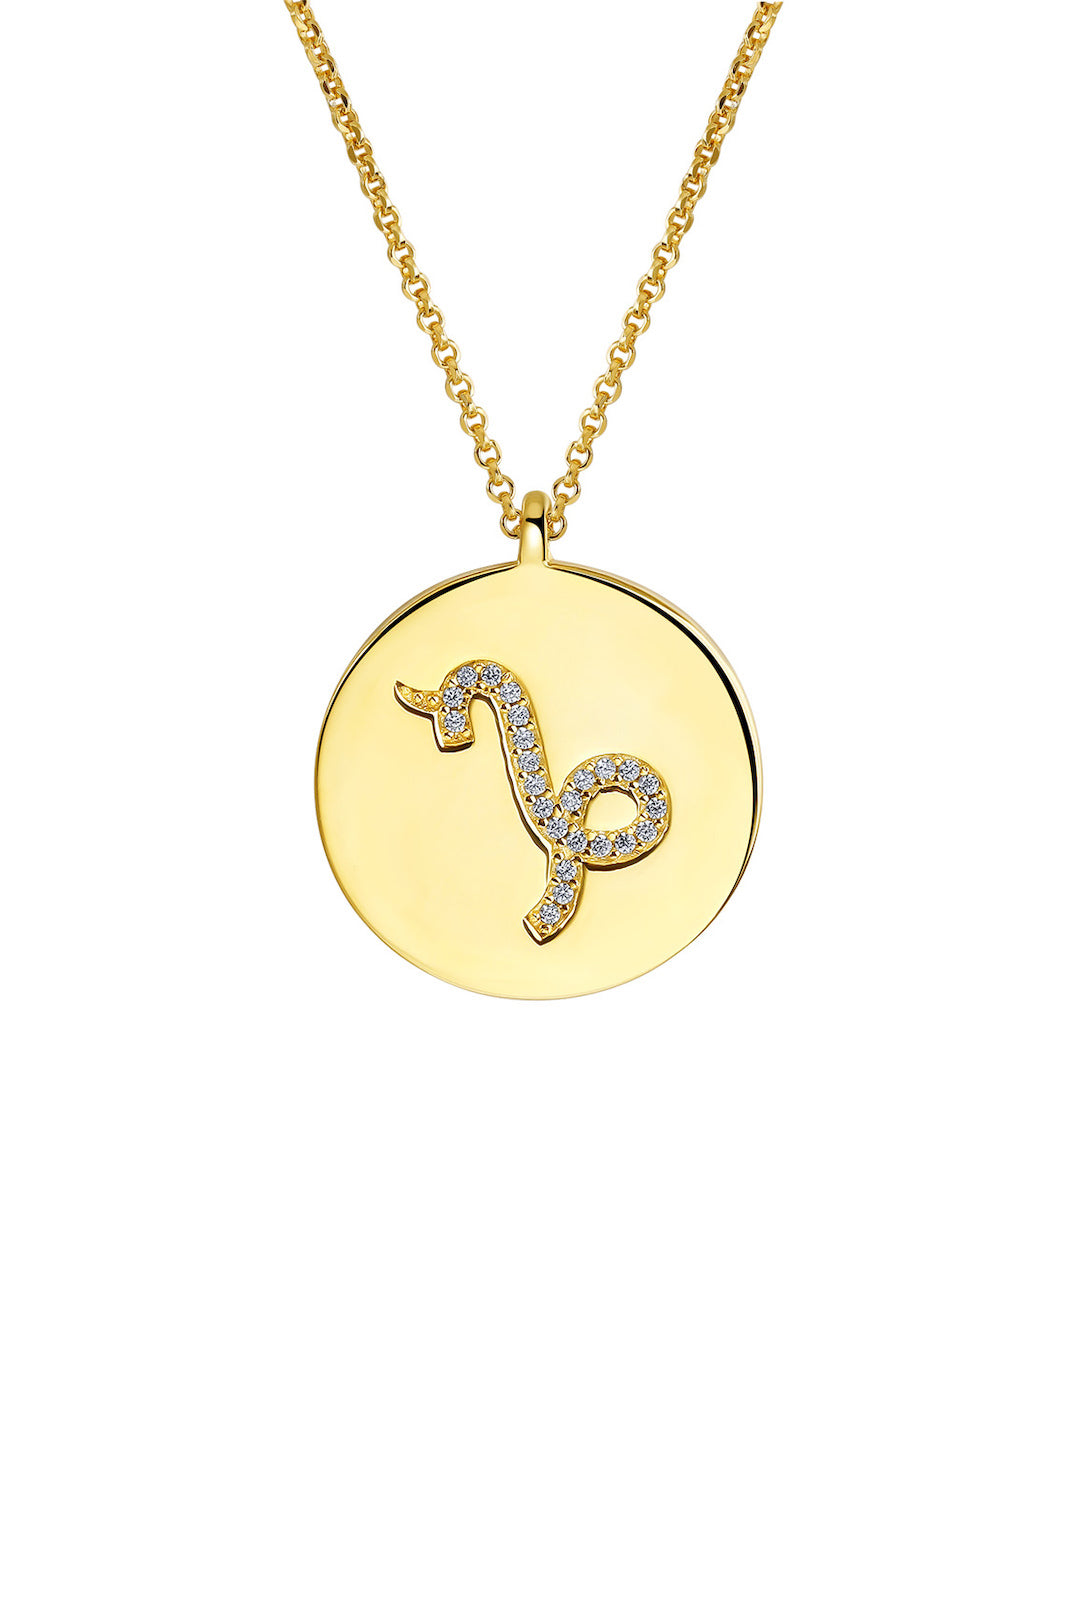 Gold Plated Silver Zodiac Necklace - Capricorn Side View